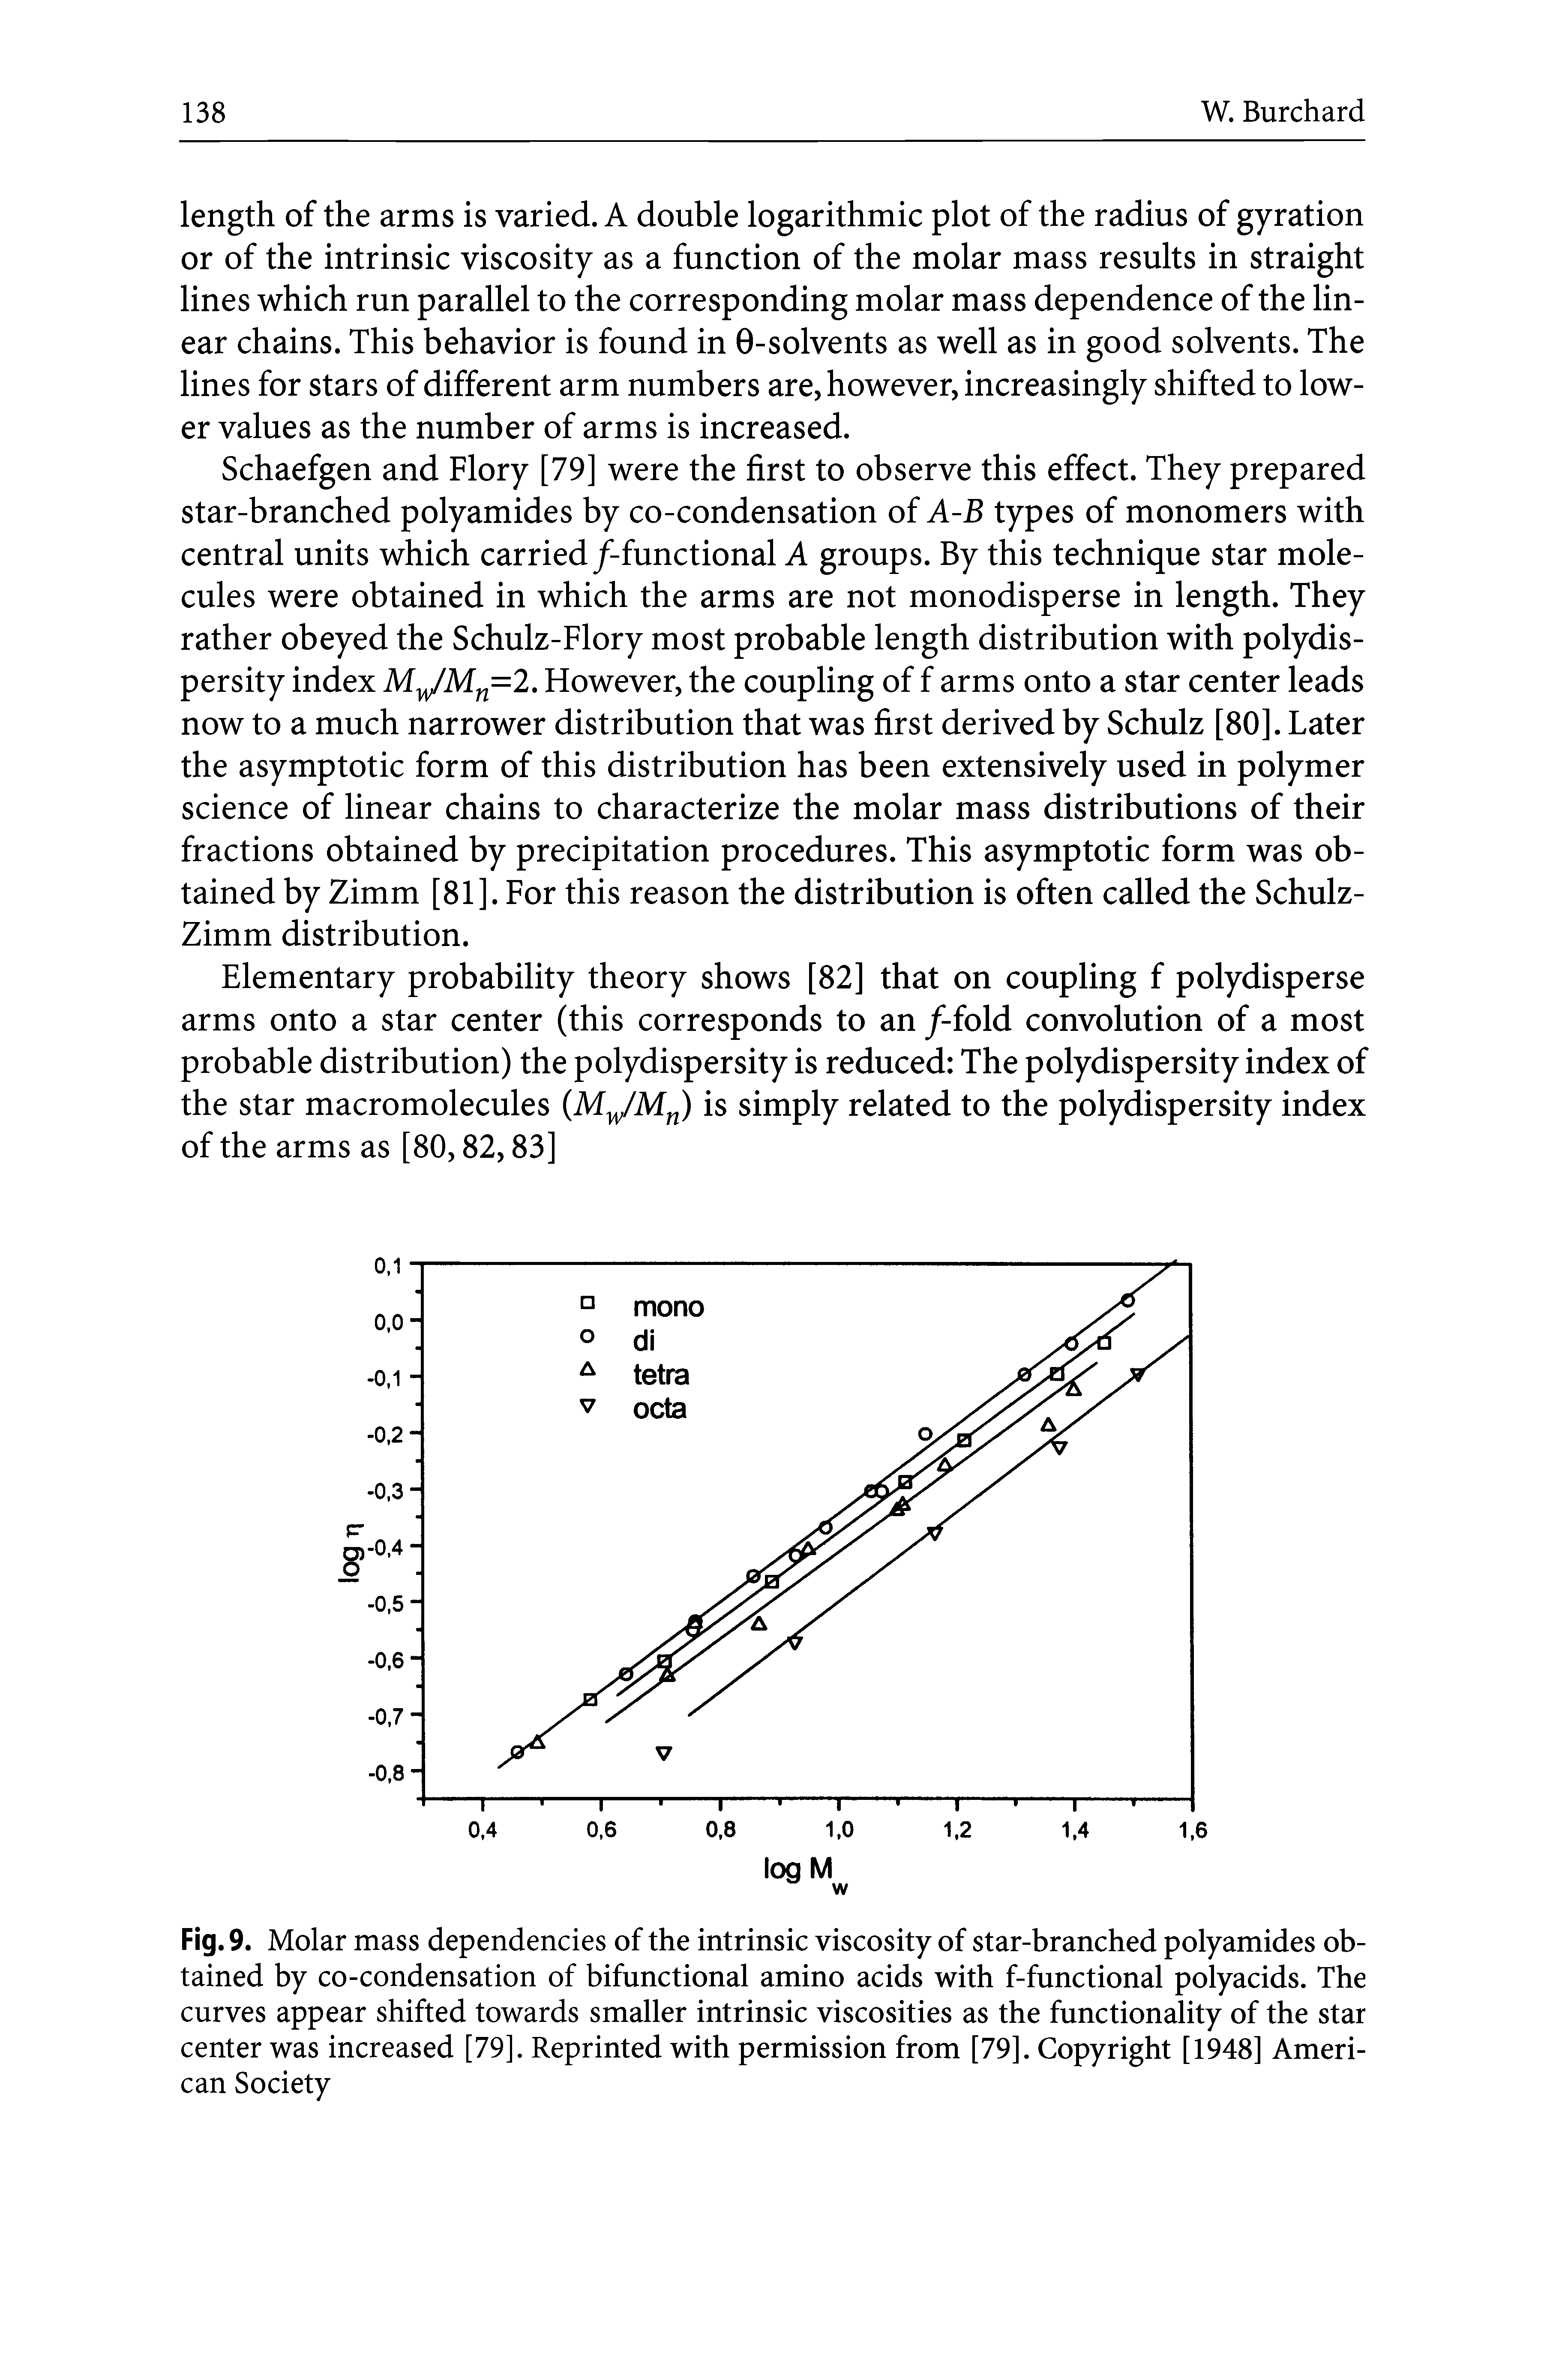 Fig. 9. Molar mass dependencies of the intrinsic viscosity of star-branched polyamides obtained by co-condensation of bifunctional amino acids with f-functional polyacids. The curves appear shifted towards smaller intrinsic viscosities as the functionality of the star center was increased [79]. Reprinted with permission from [79]. Copyright [1948] American Society...